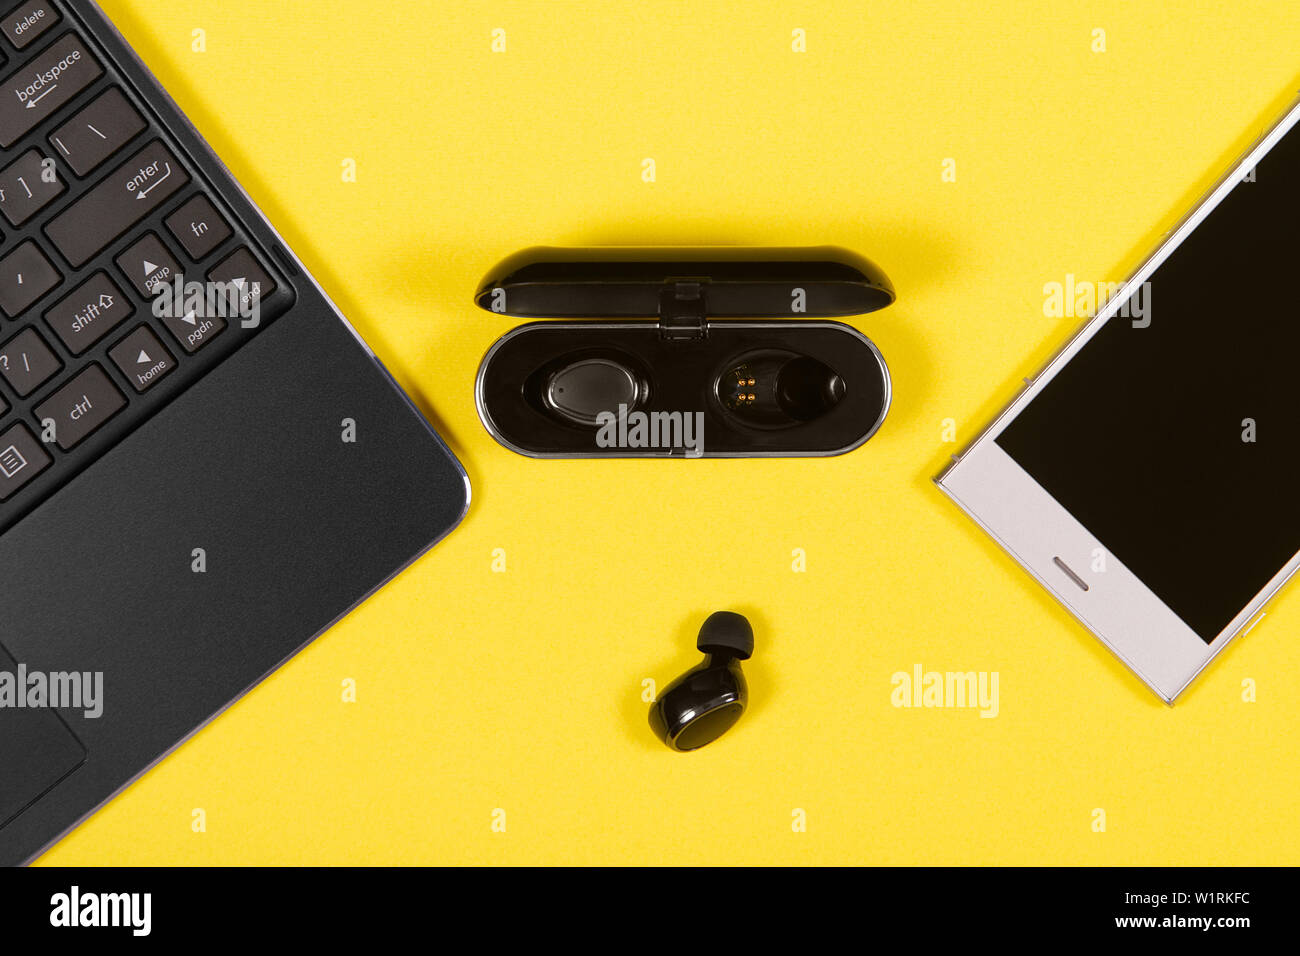 Flat lay composition with Electronics devices on yellow background Stock Photo